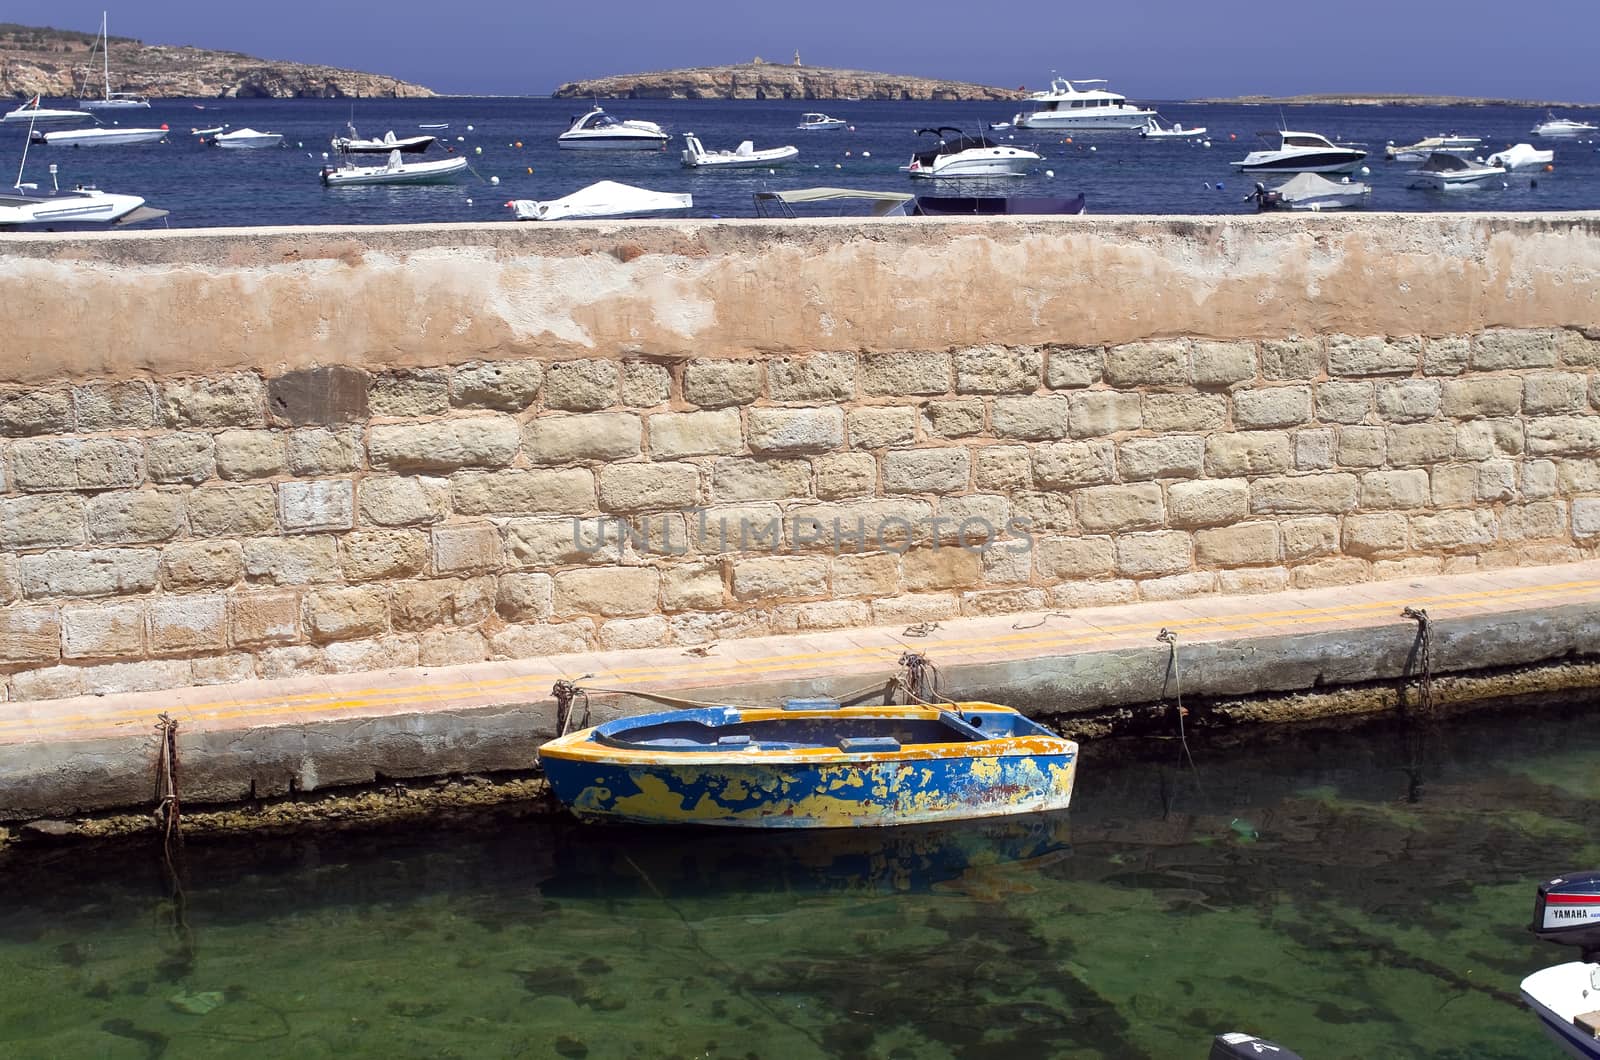 Boat in the boat shelter in the old part of fishing village of St Paul's Bay - San Pawl il-Baħar, Malta